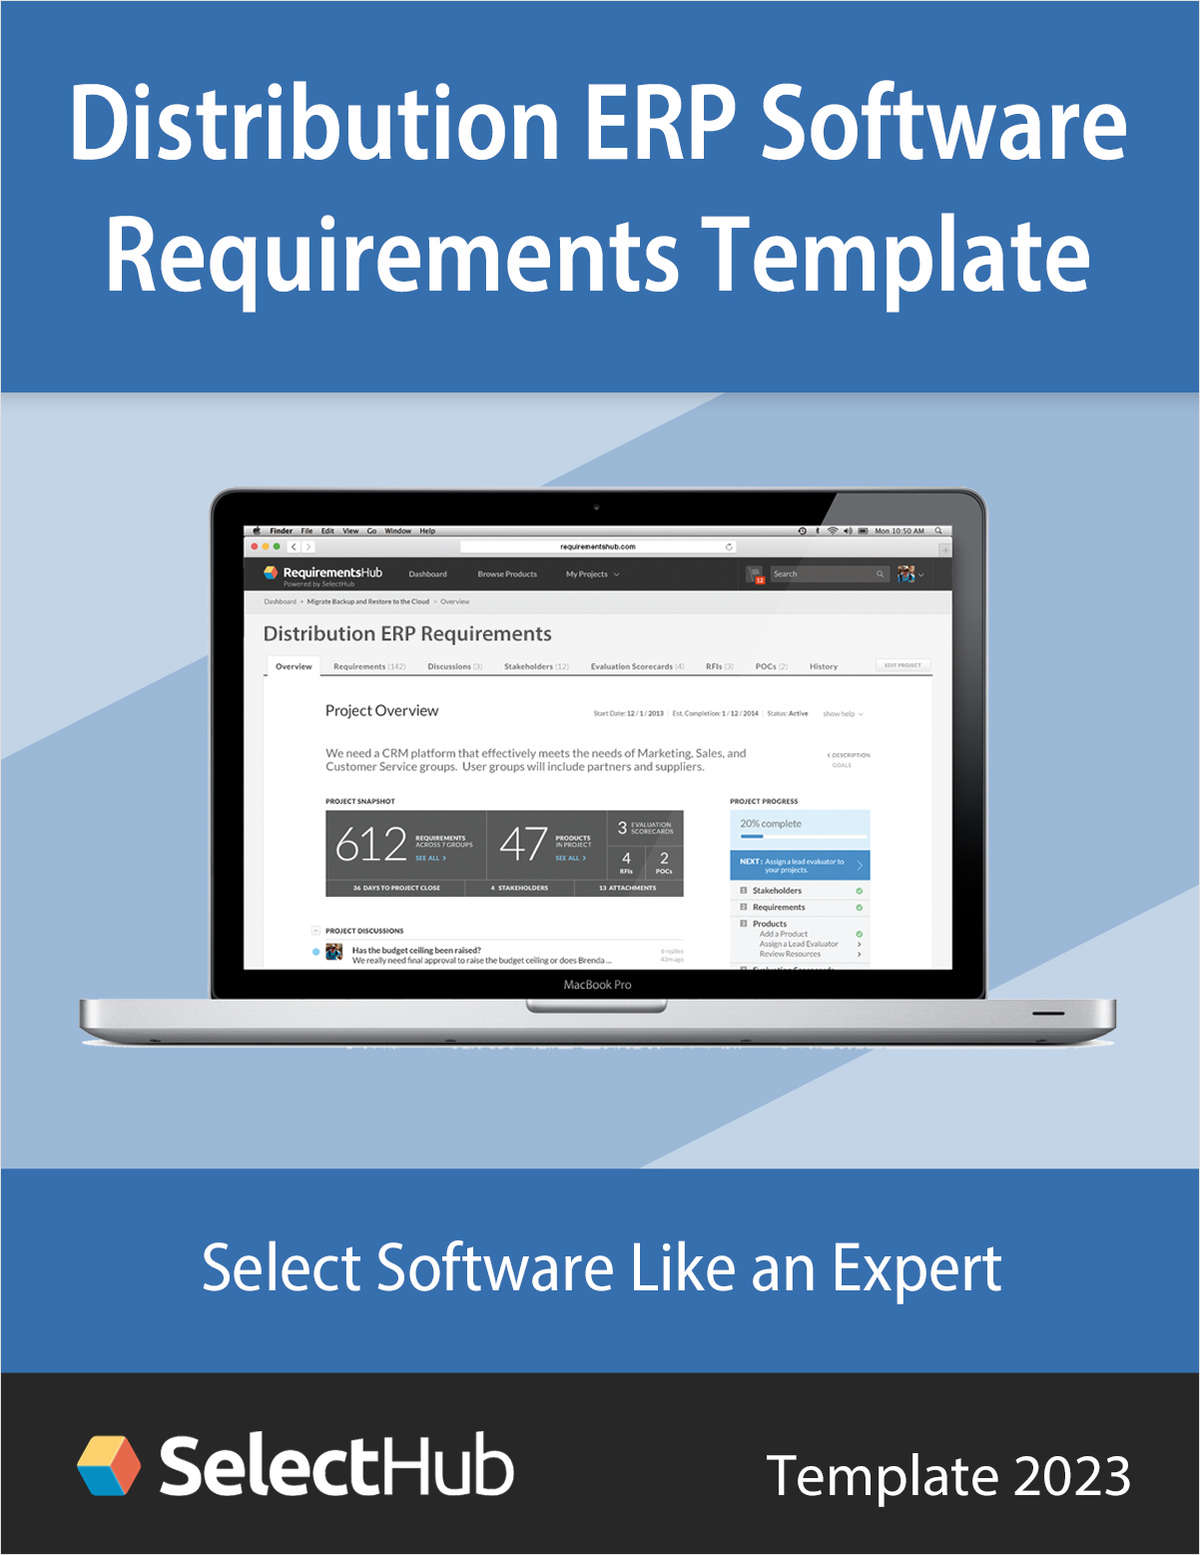 Distribution ERP Software Requirements Template 2023